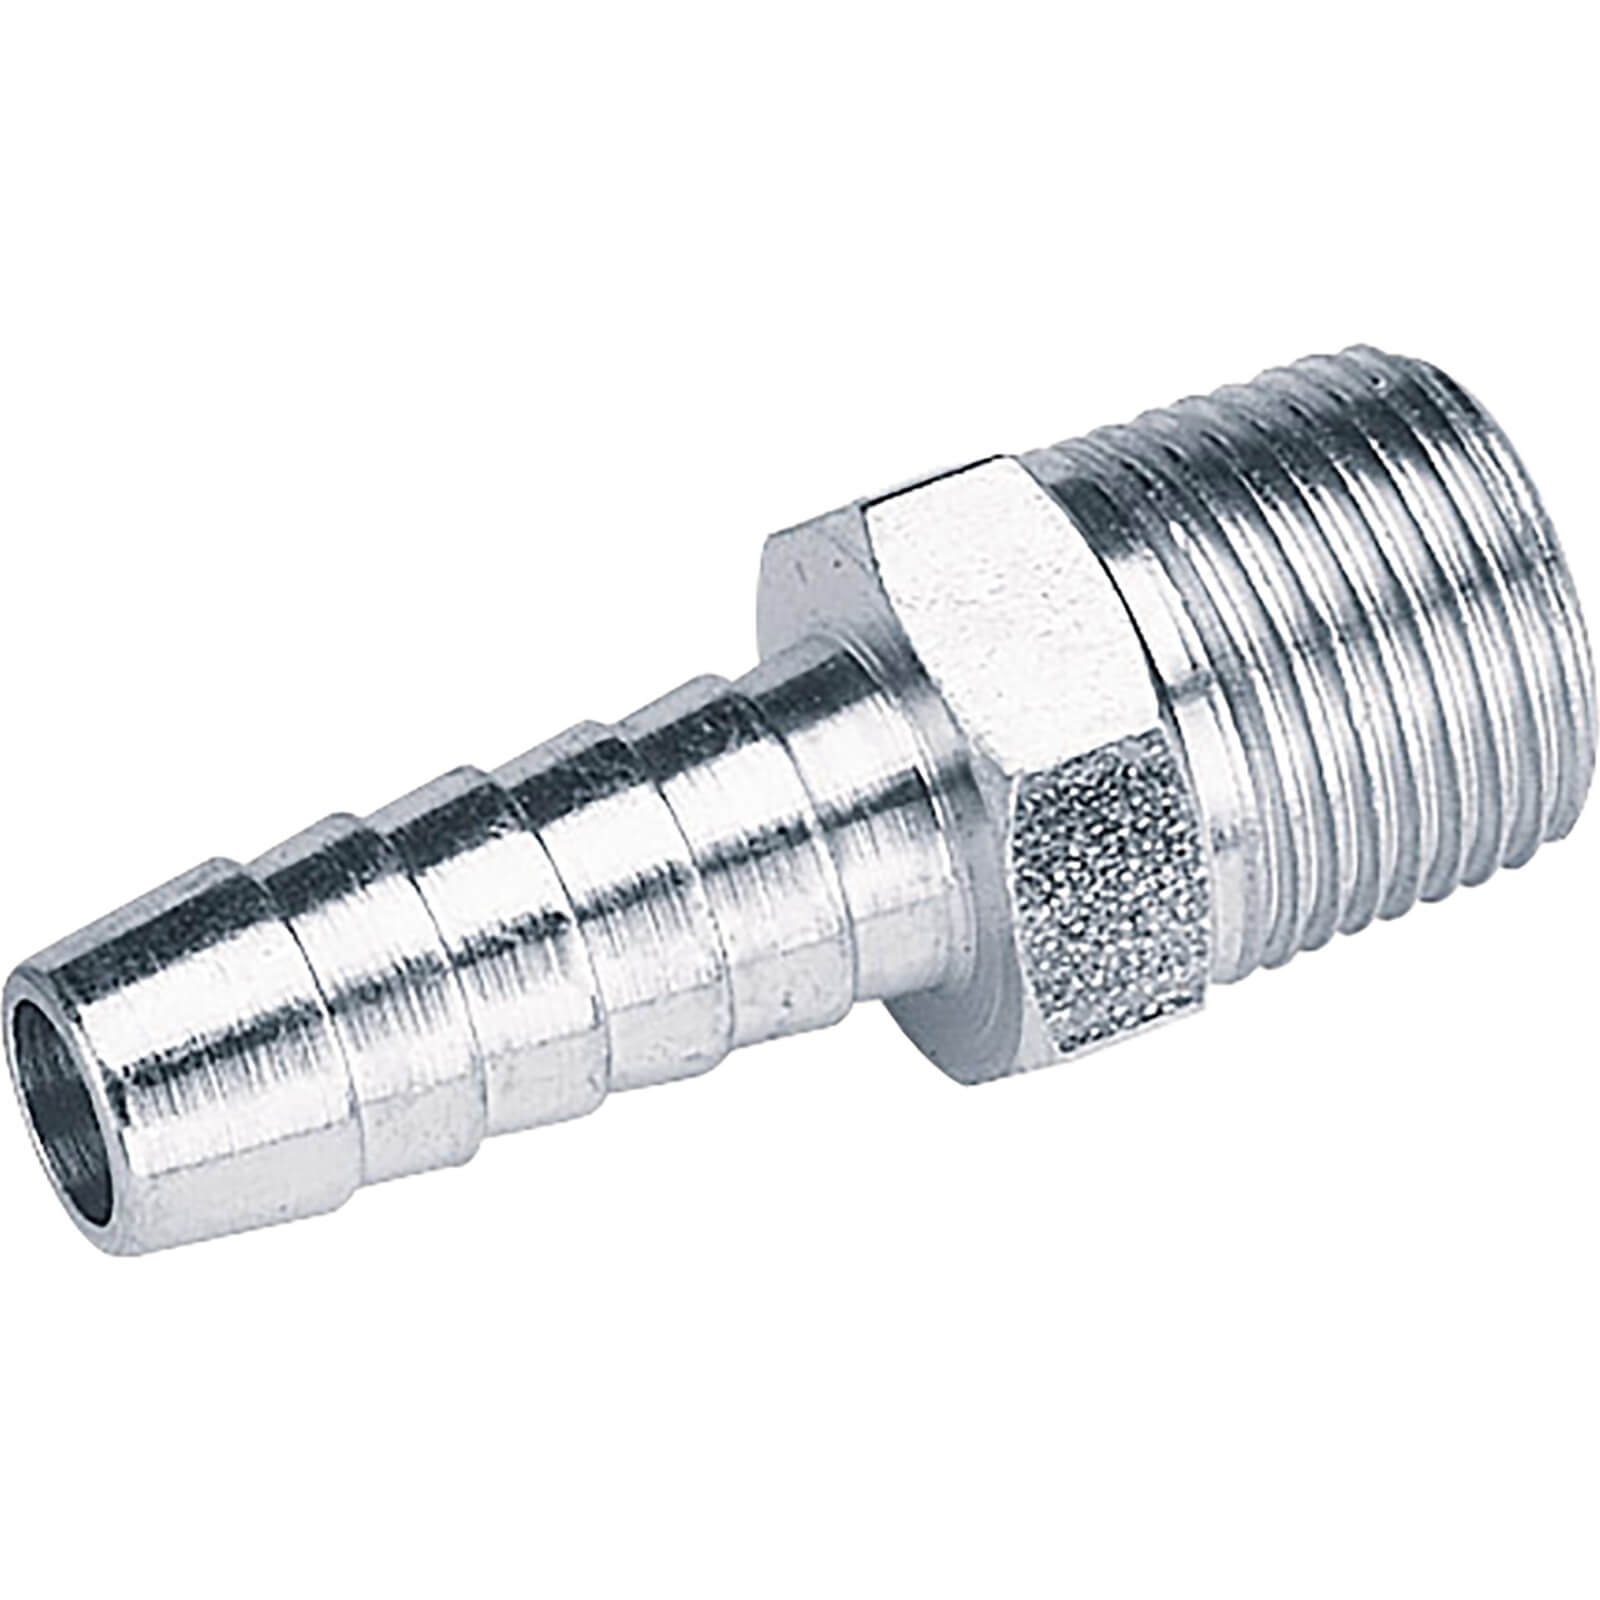 Photo of Draper Pcl Tailpiece Air Line Fitting Bspt Male Thread 3/8